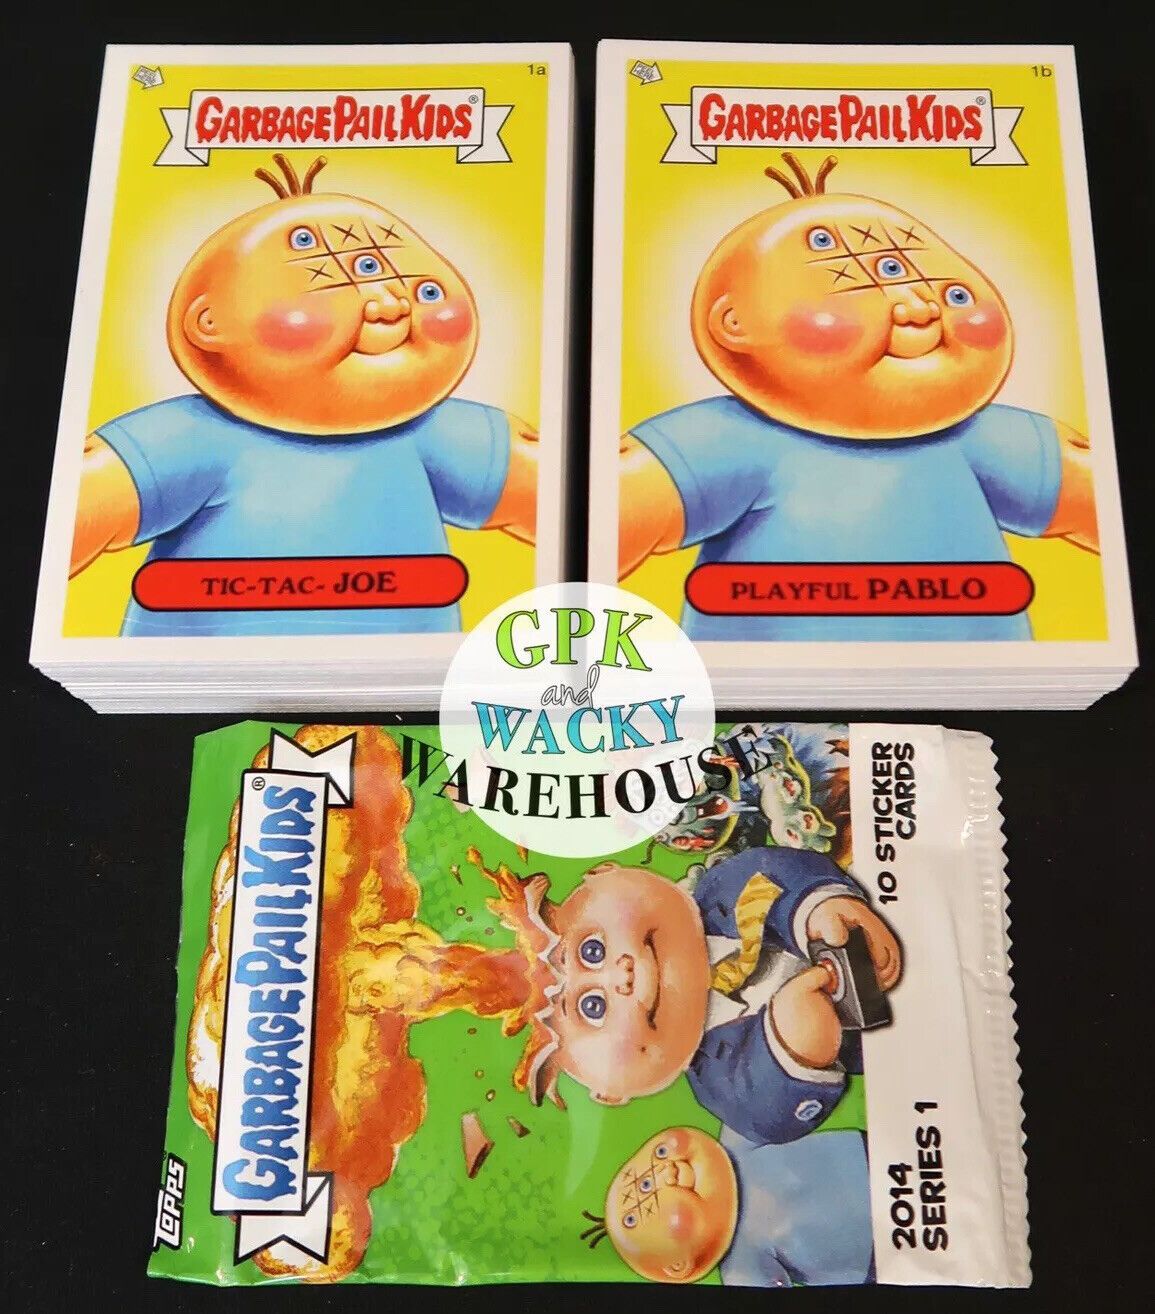 2014 GARBAGE PAIL KIDS 1ST SERIES 1 COMPLETE BASE SET 132 CARDS + WRAPPER 